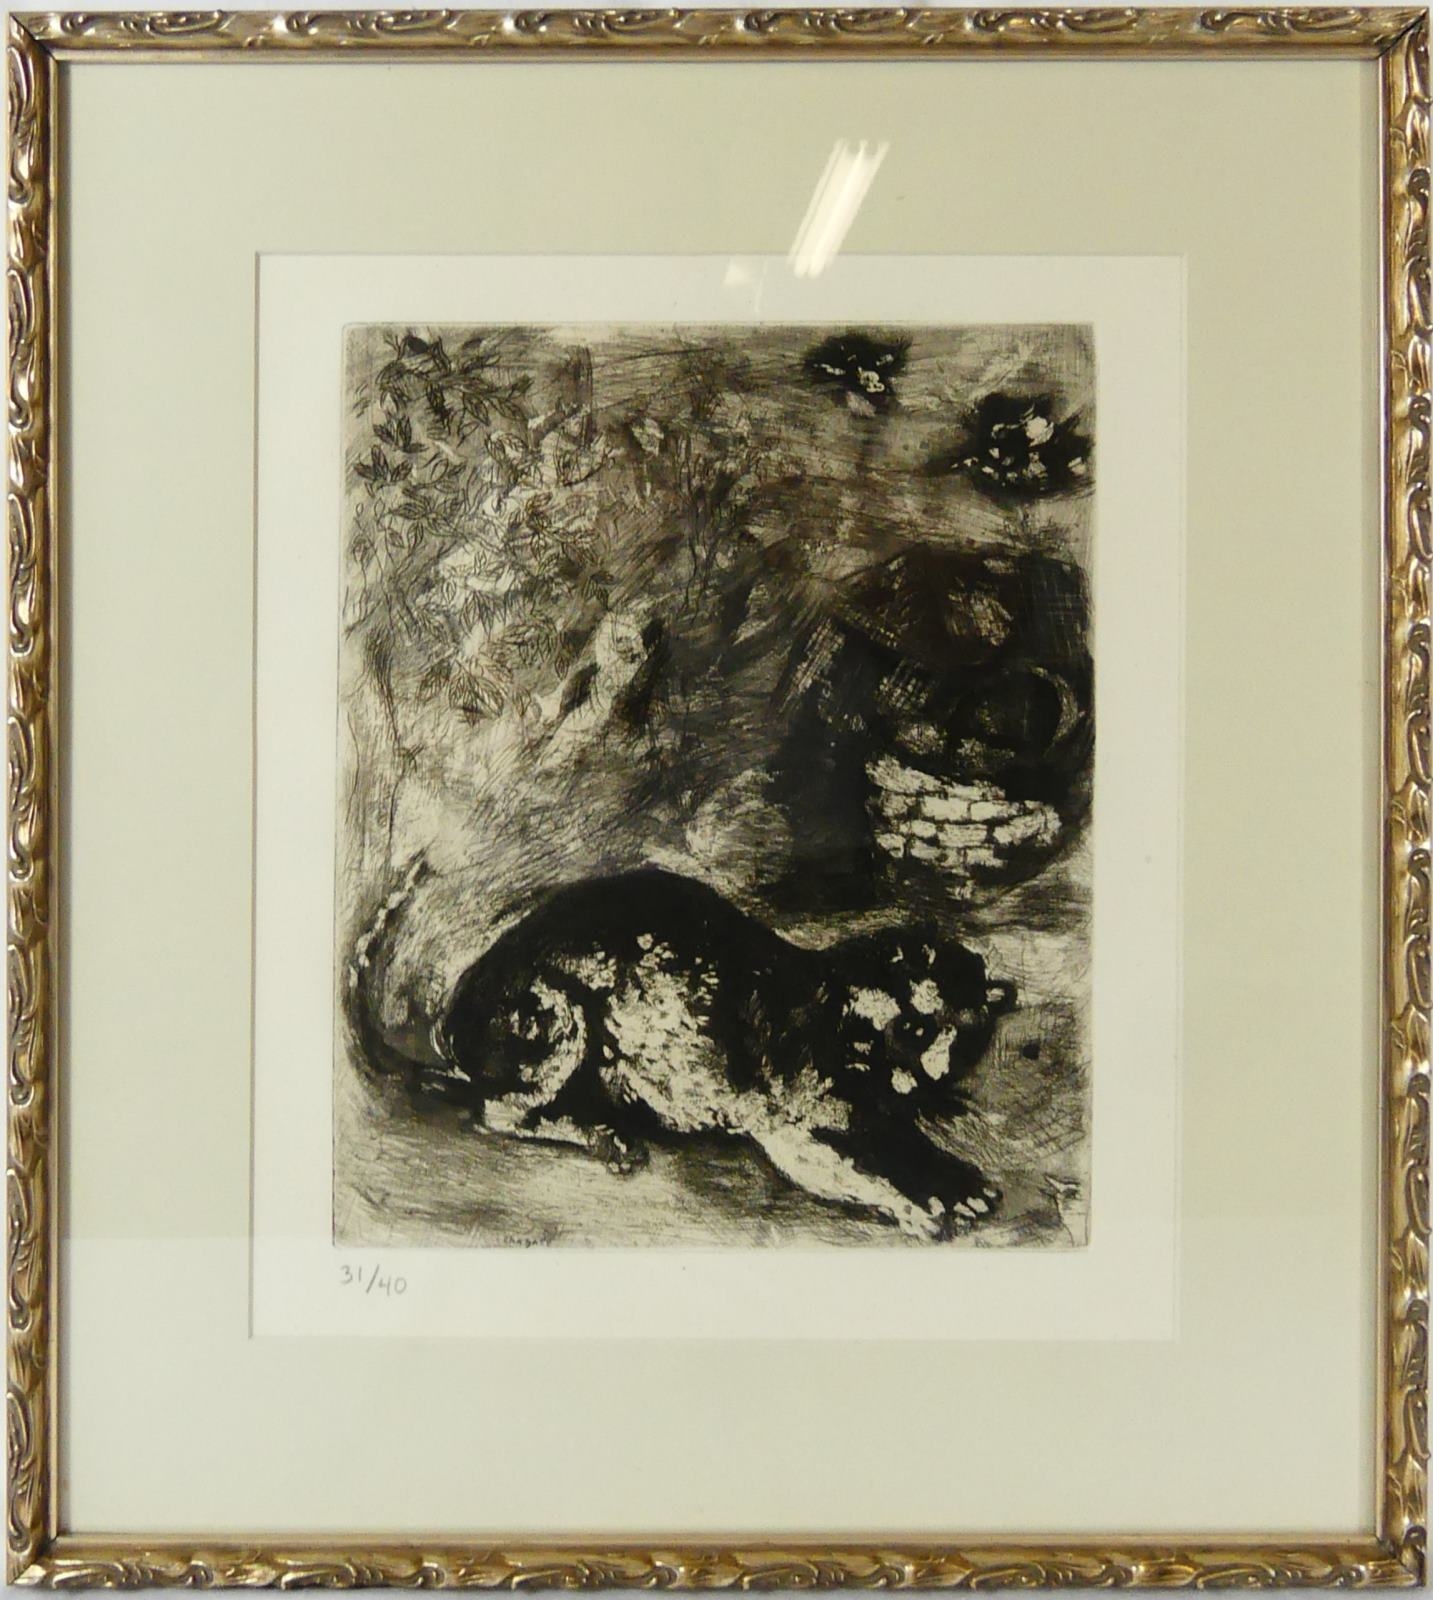 Artwork by Marc Chagall, The Cat and the Two Sparrows, Made of etching